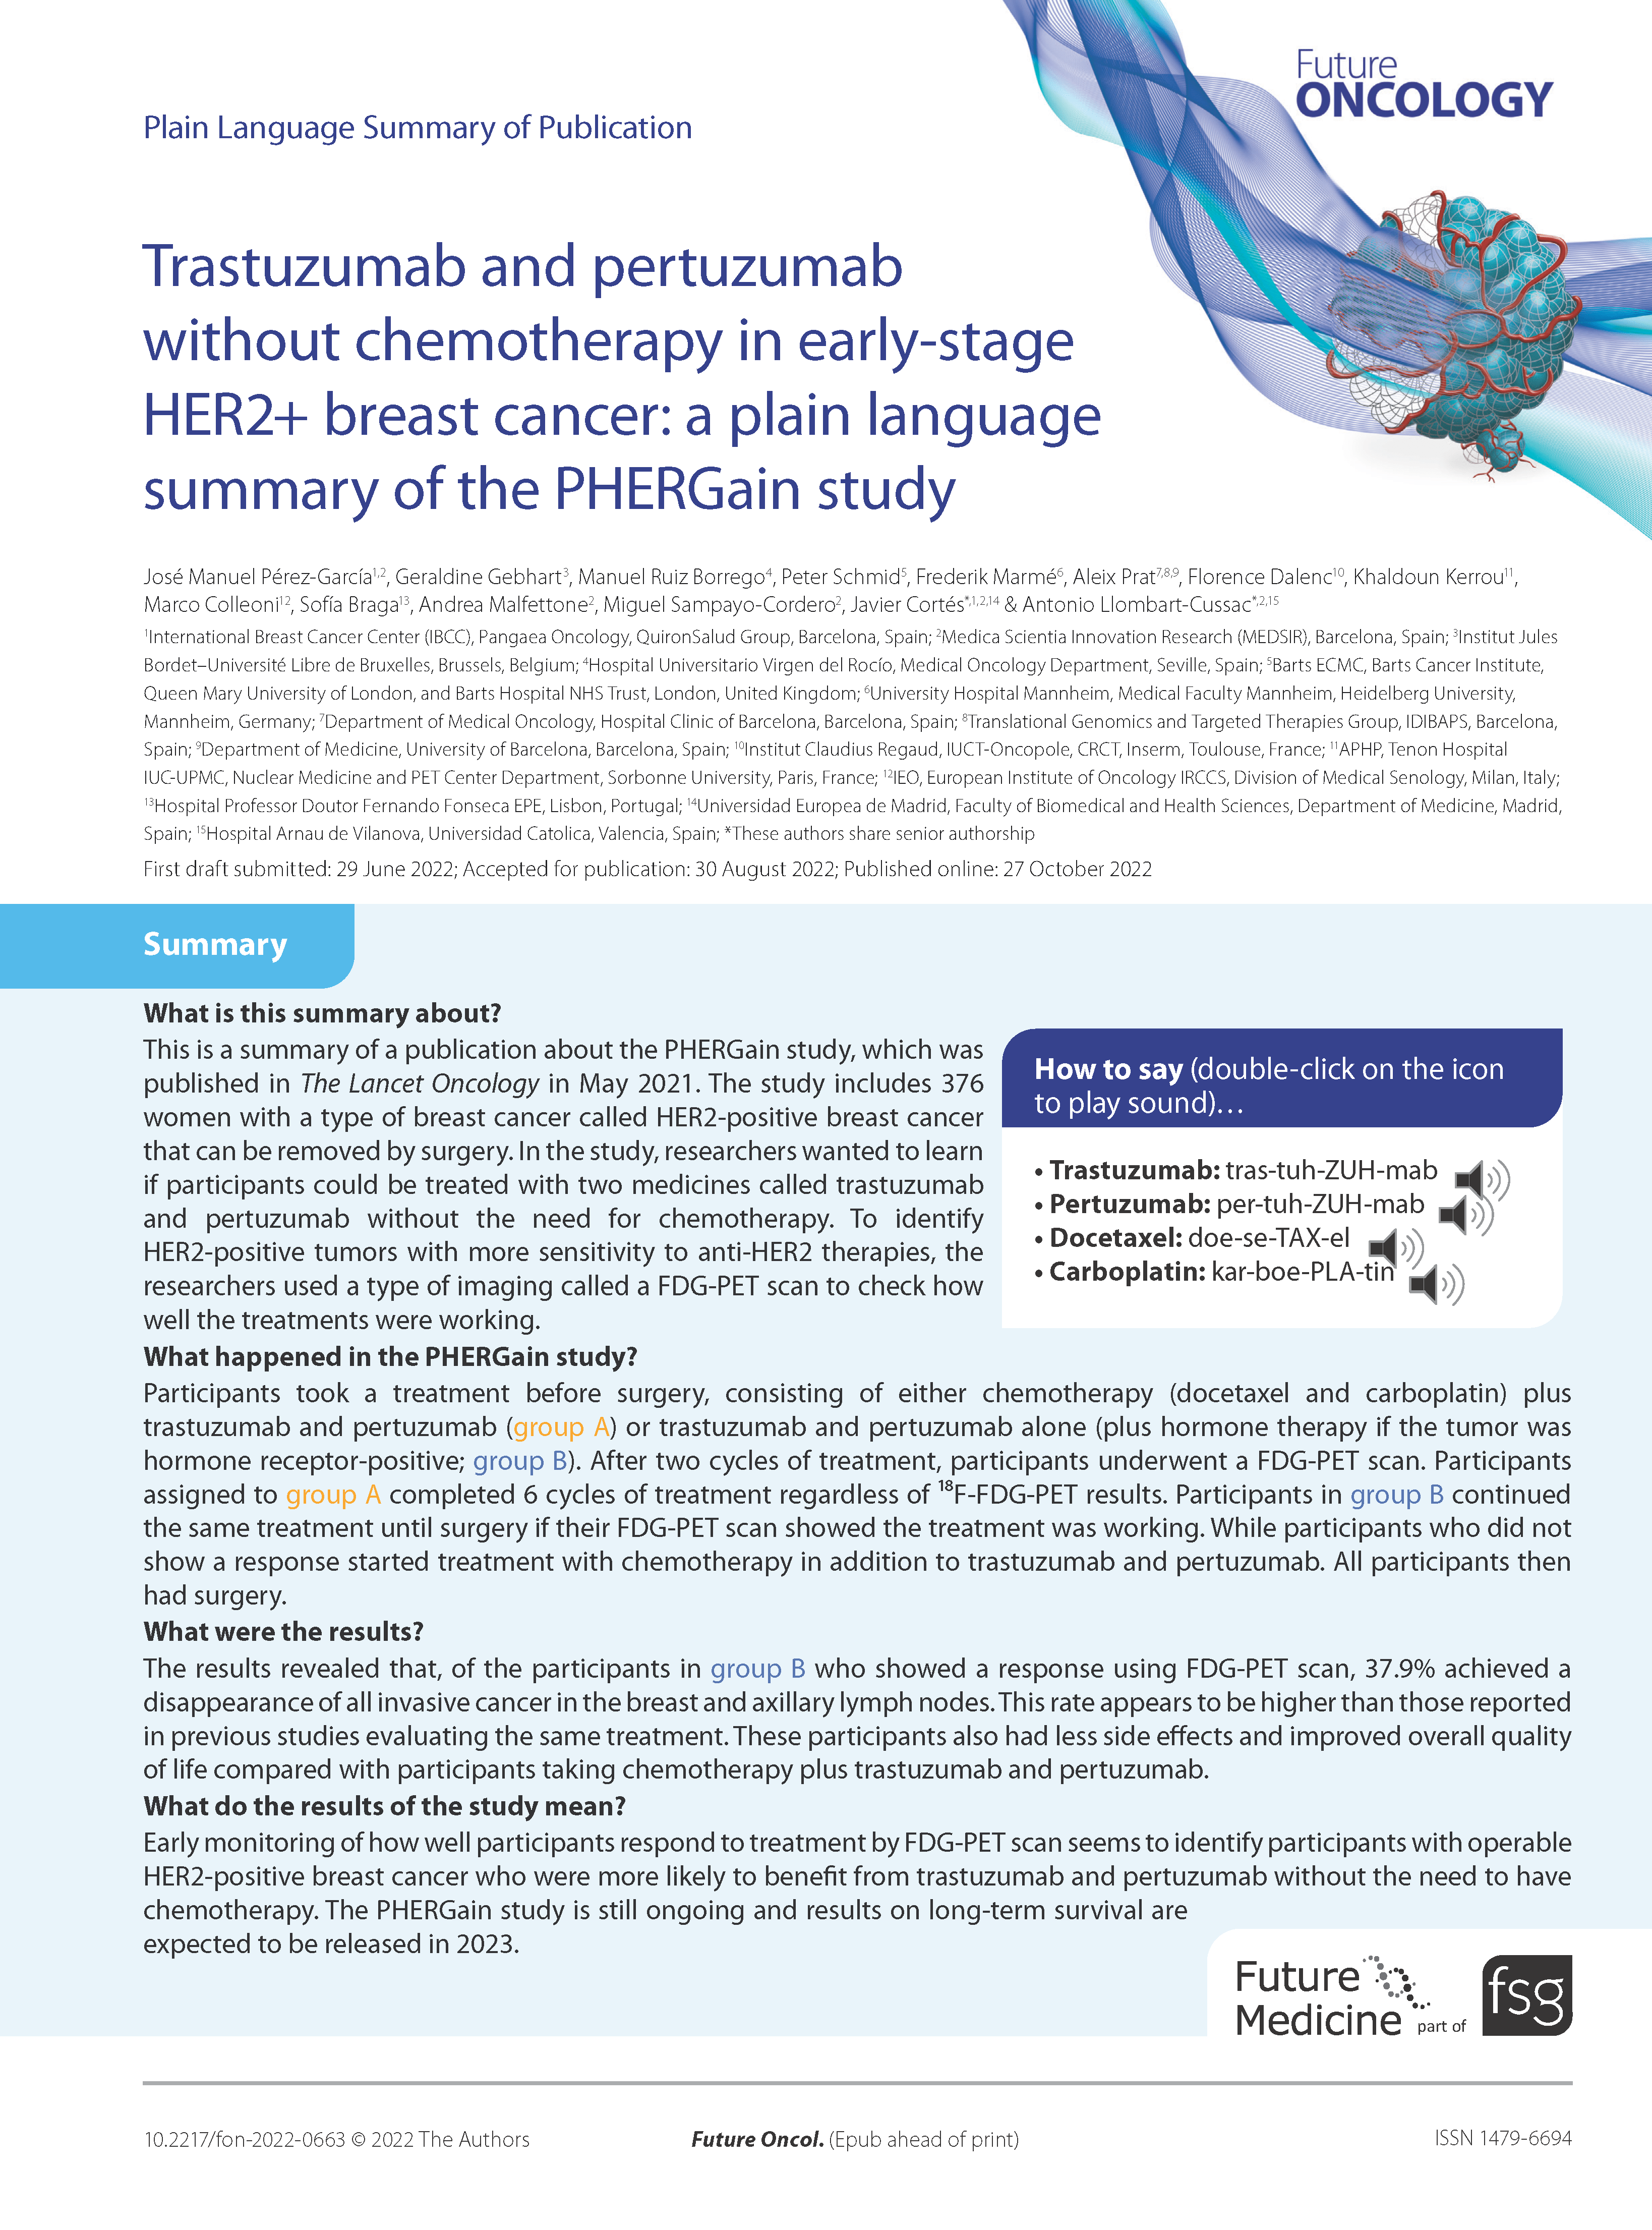 Trastuzumab and pertuzumab without chemotherapy in early-stage HER2+ breast cancer: a plain language summary of the PHERGain study